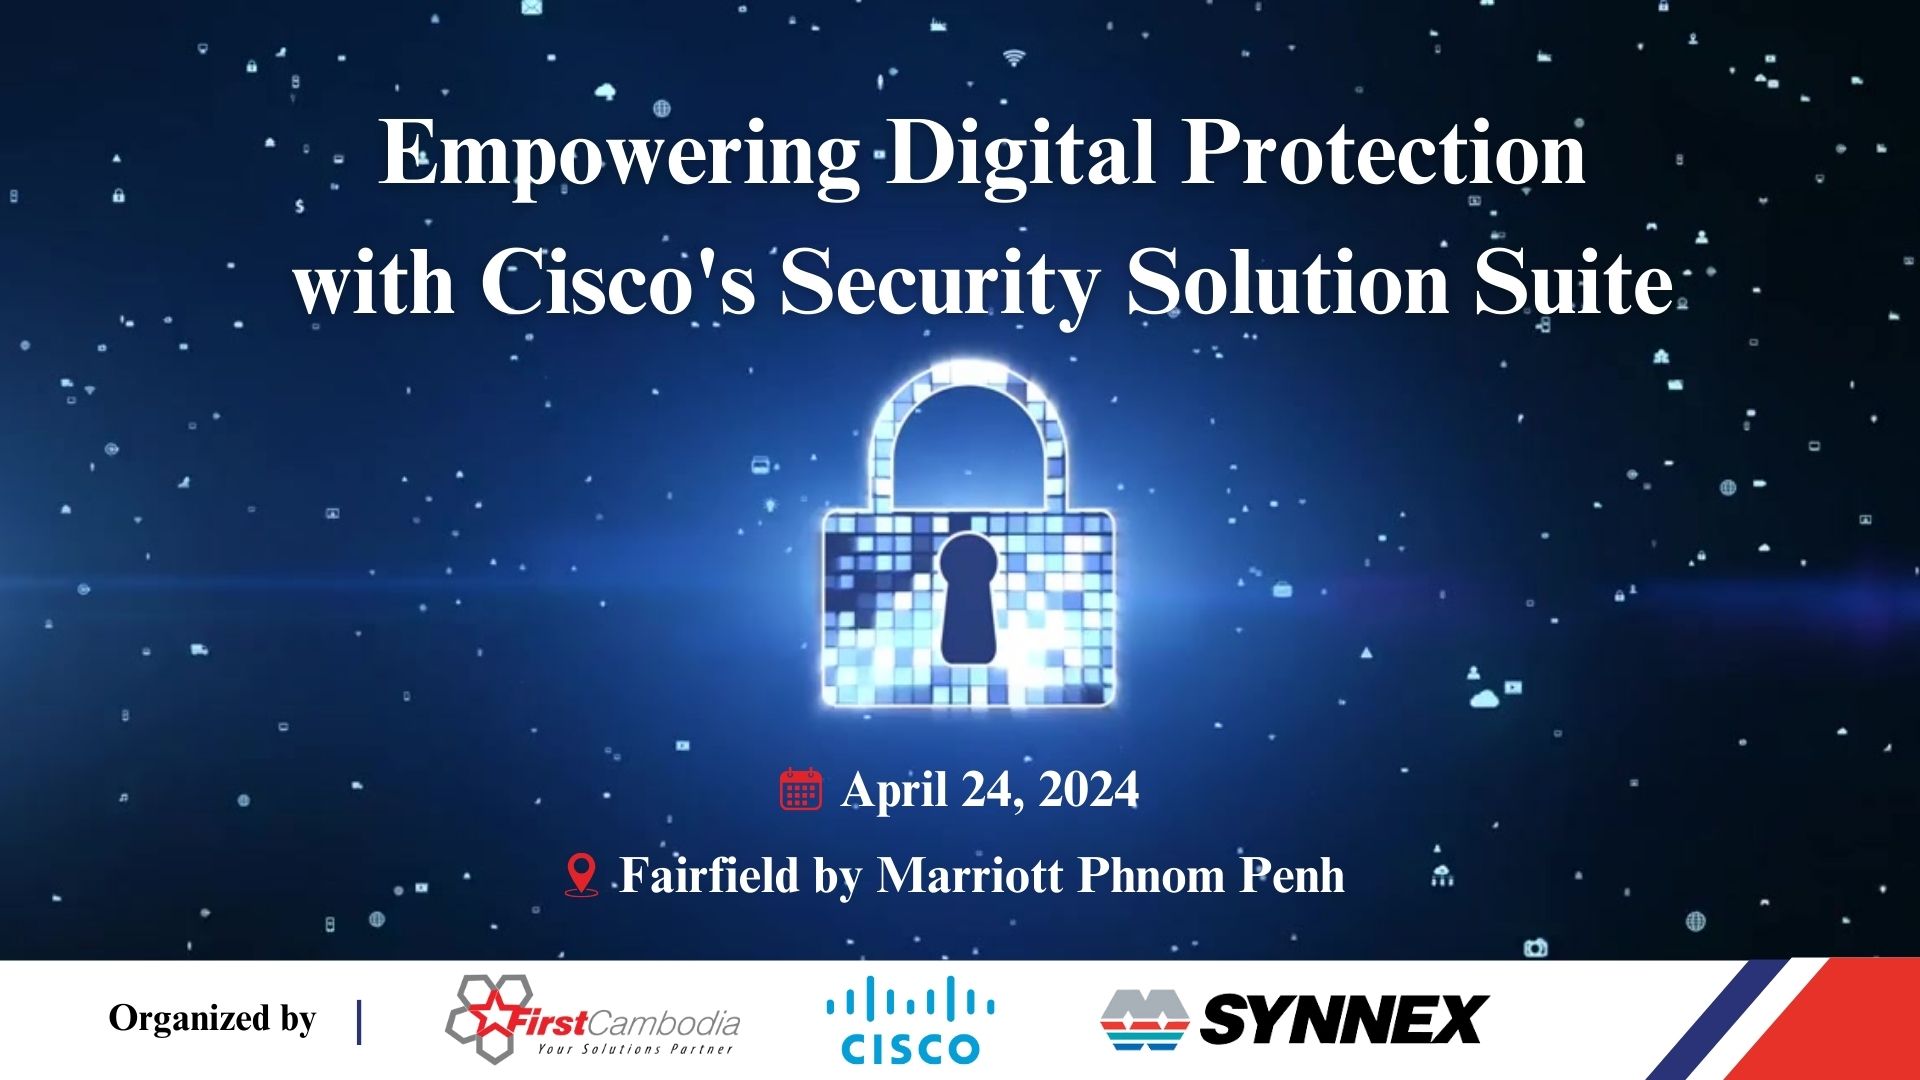 Empowering Digital Protection: A Landmark Event by First Cambodia, Cisco, and Synnex 